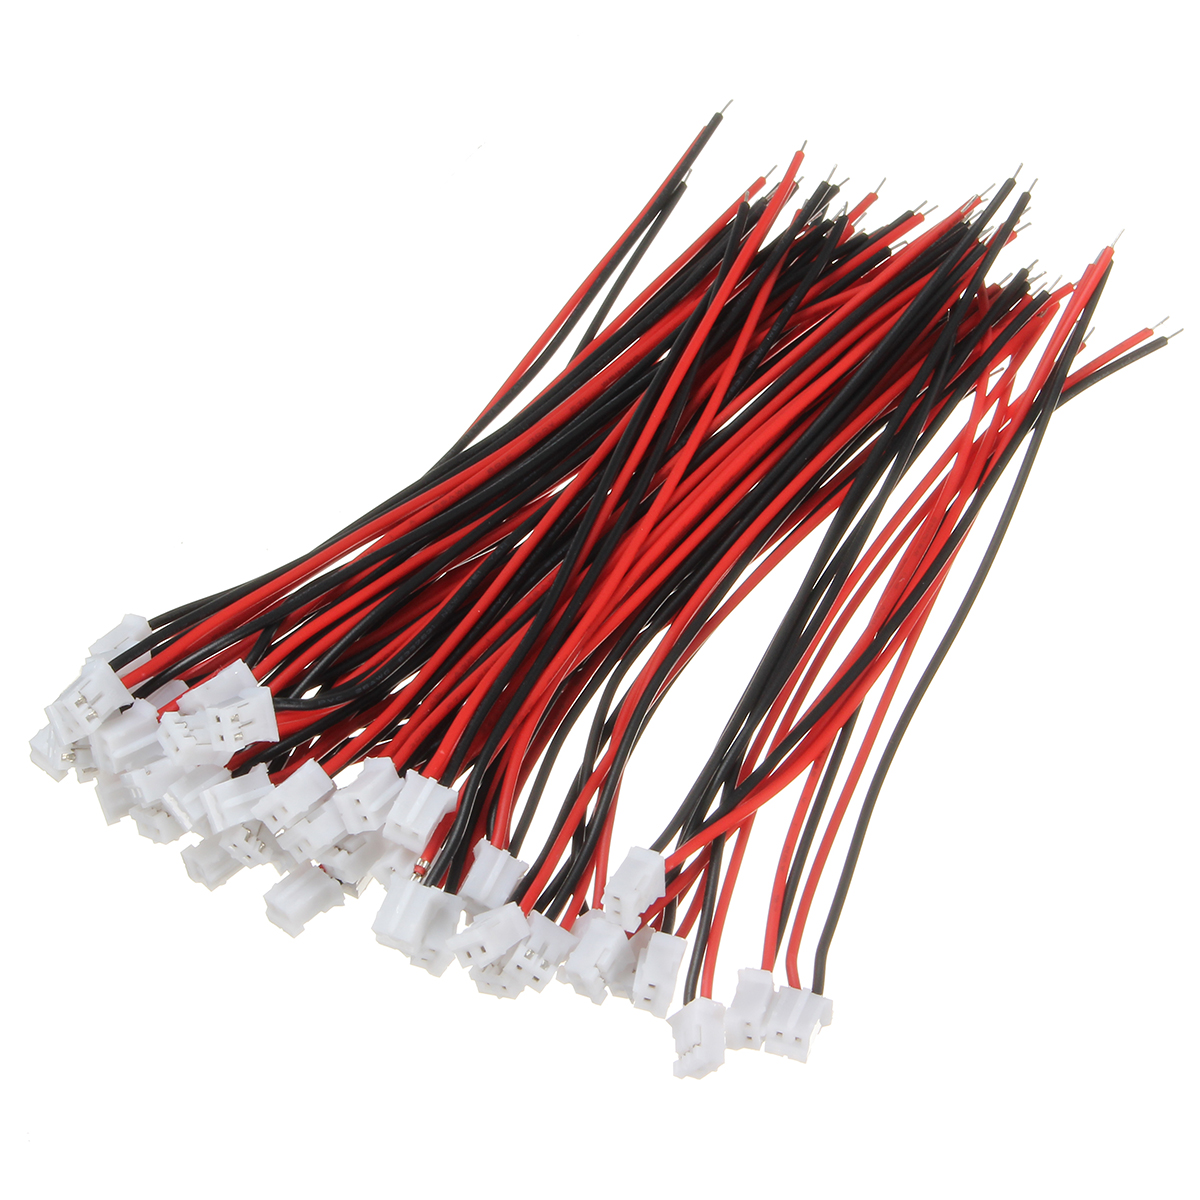 Excellwayreg-100Pcs-Mini-Micro-JST-20-PH-2Pin-Connector-Plug-With-120mm-Wires-Cables-1147298-3